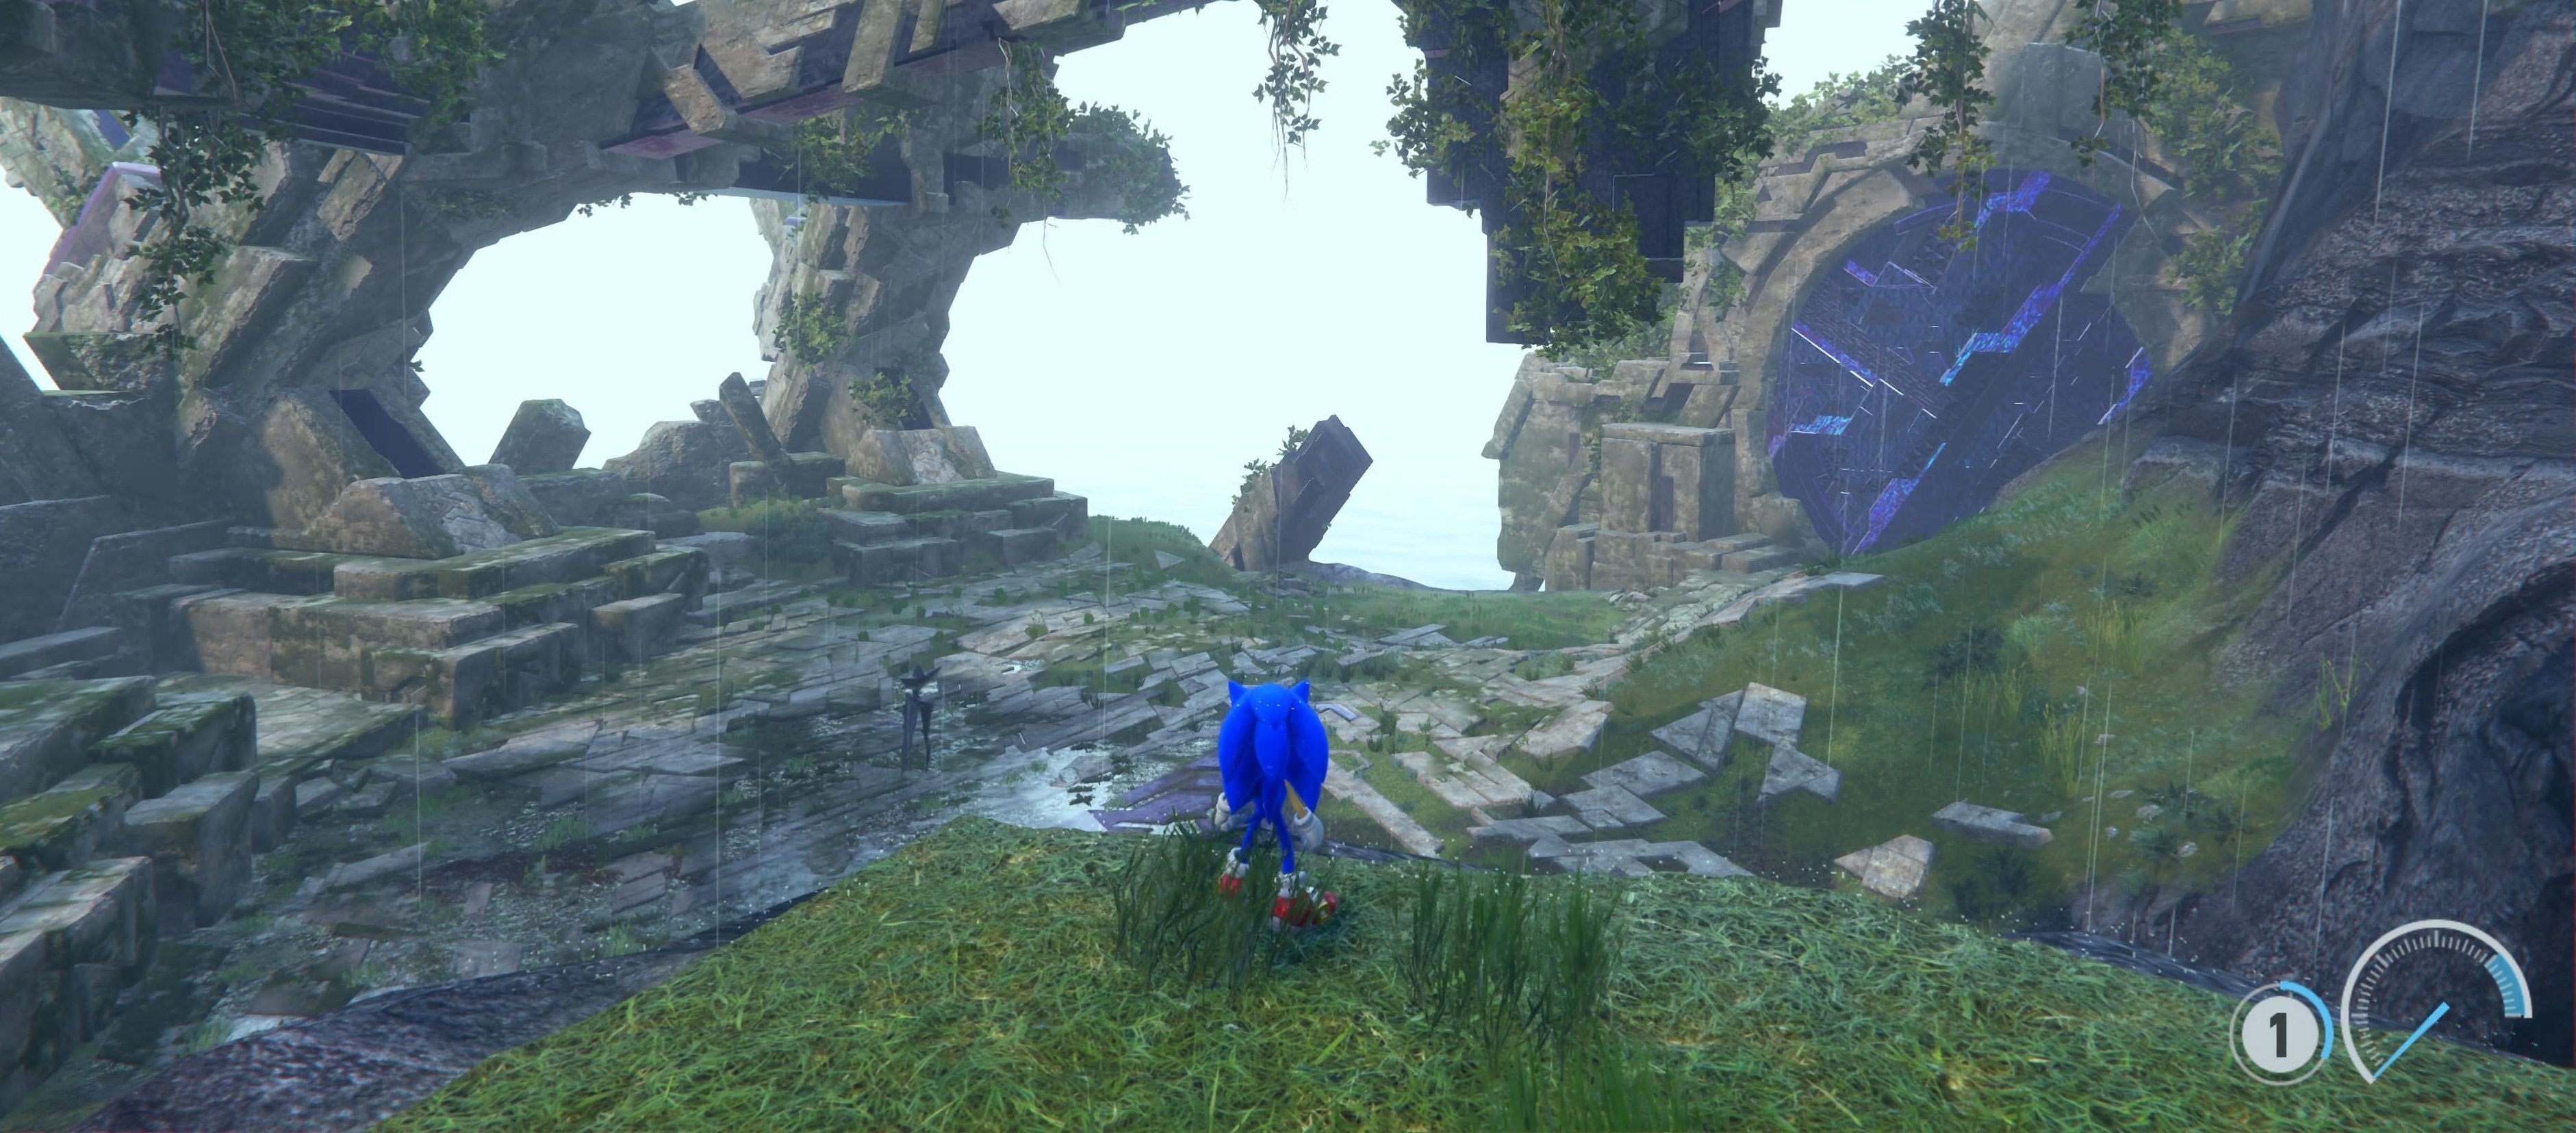 Is 'Sonic Frontiers' the Last Sonic Game? Plus: Game Details